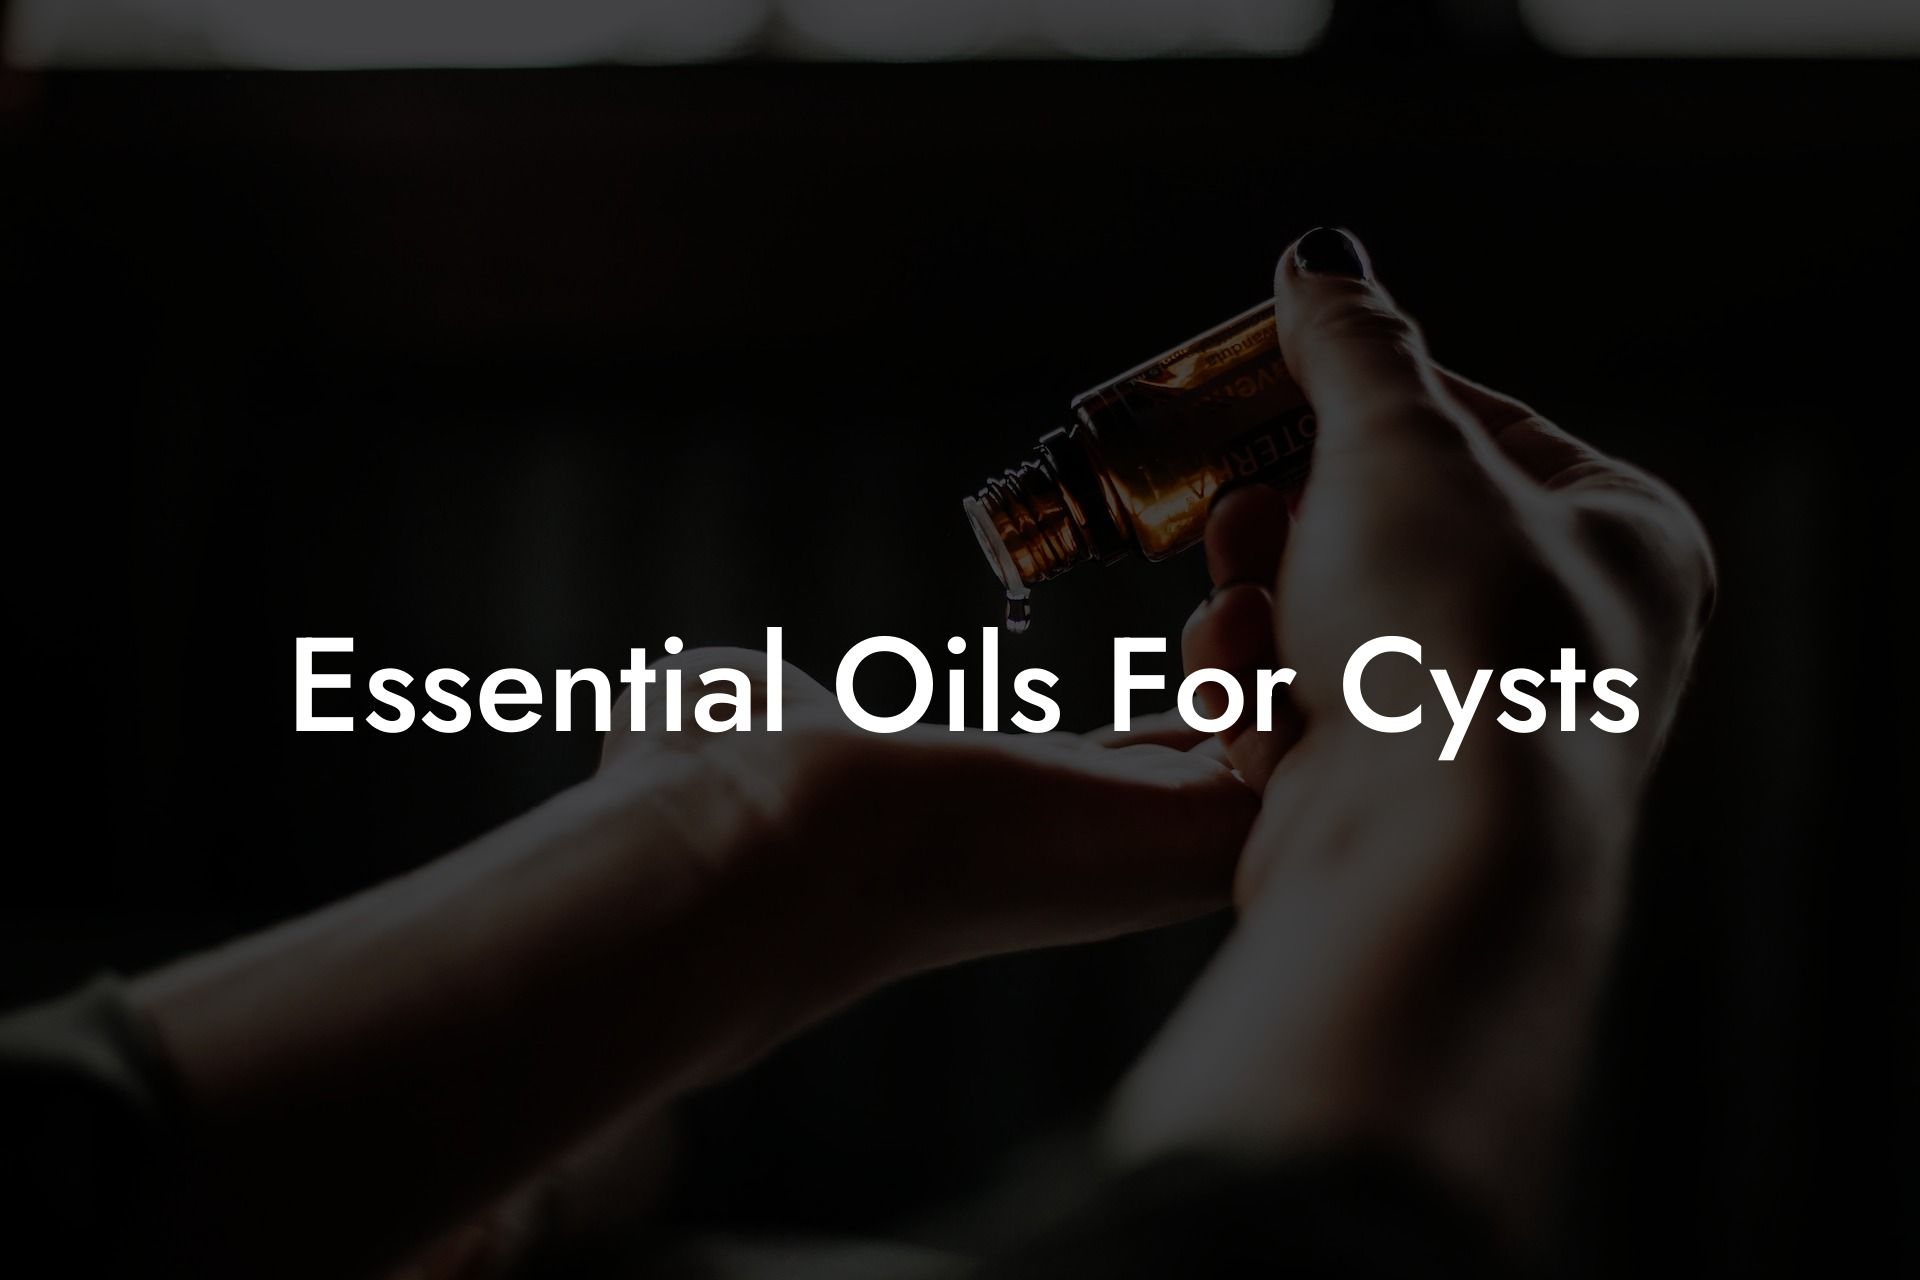 Essential Oils For Cysts